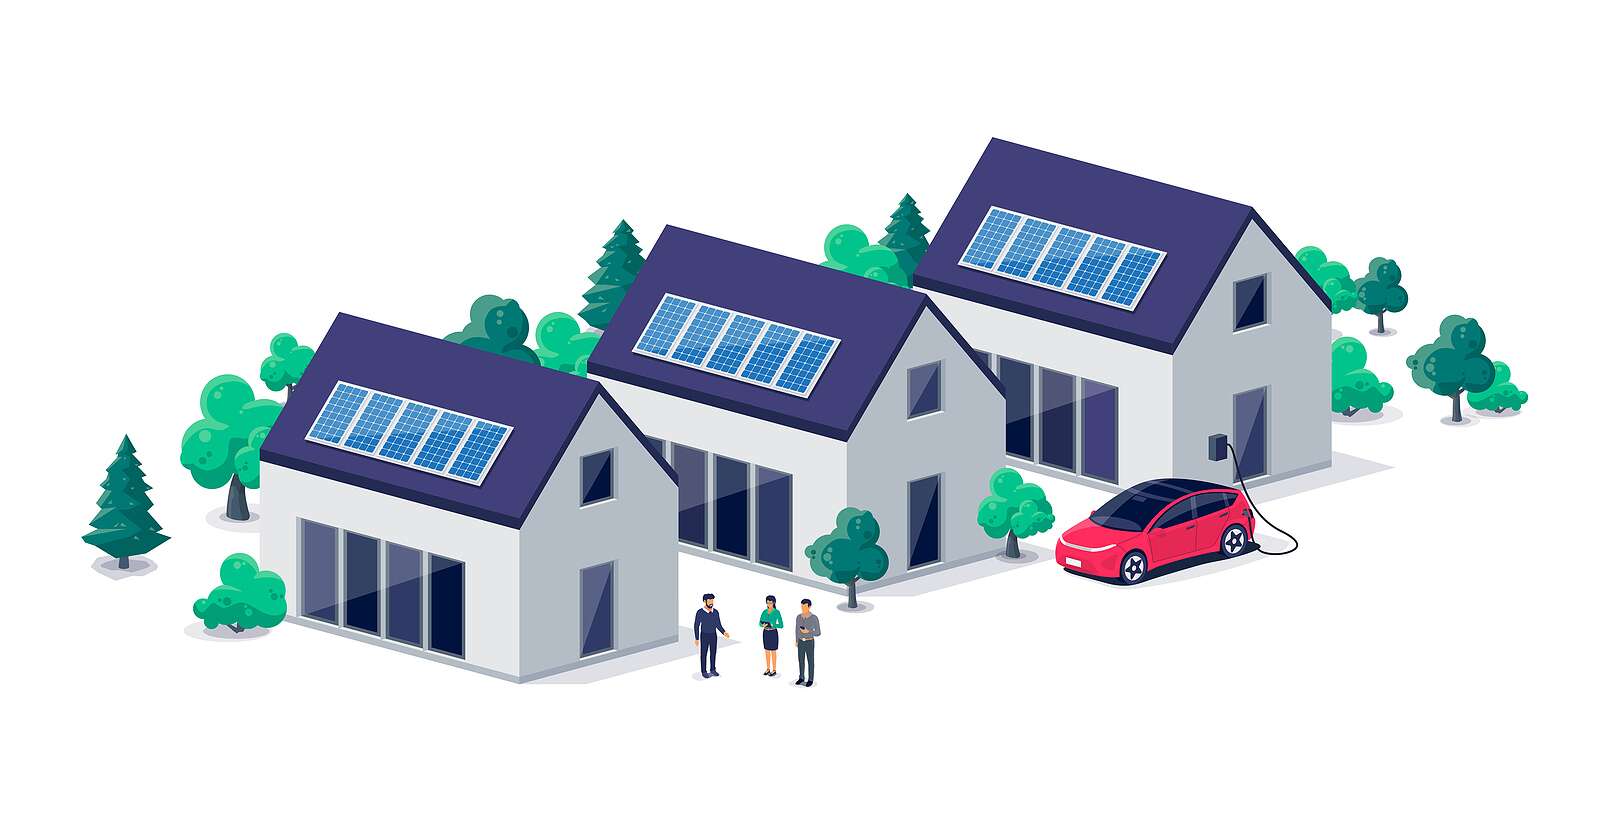 Renewable sustainable village buildings with  solar panels roof power energy. Electric car charging in front of home from wallbox. Family houses on urban city street. Isolated vector.